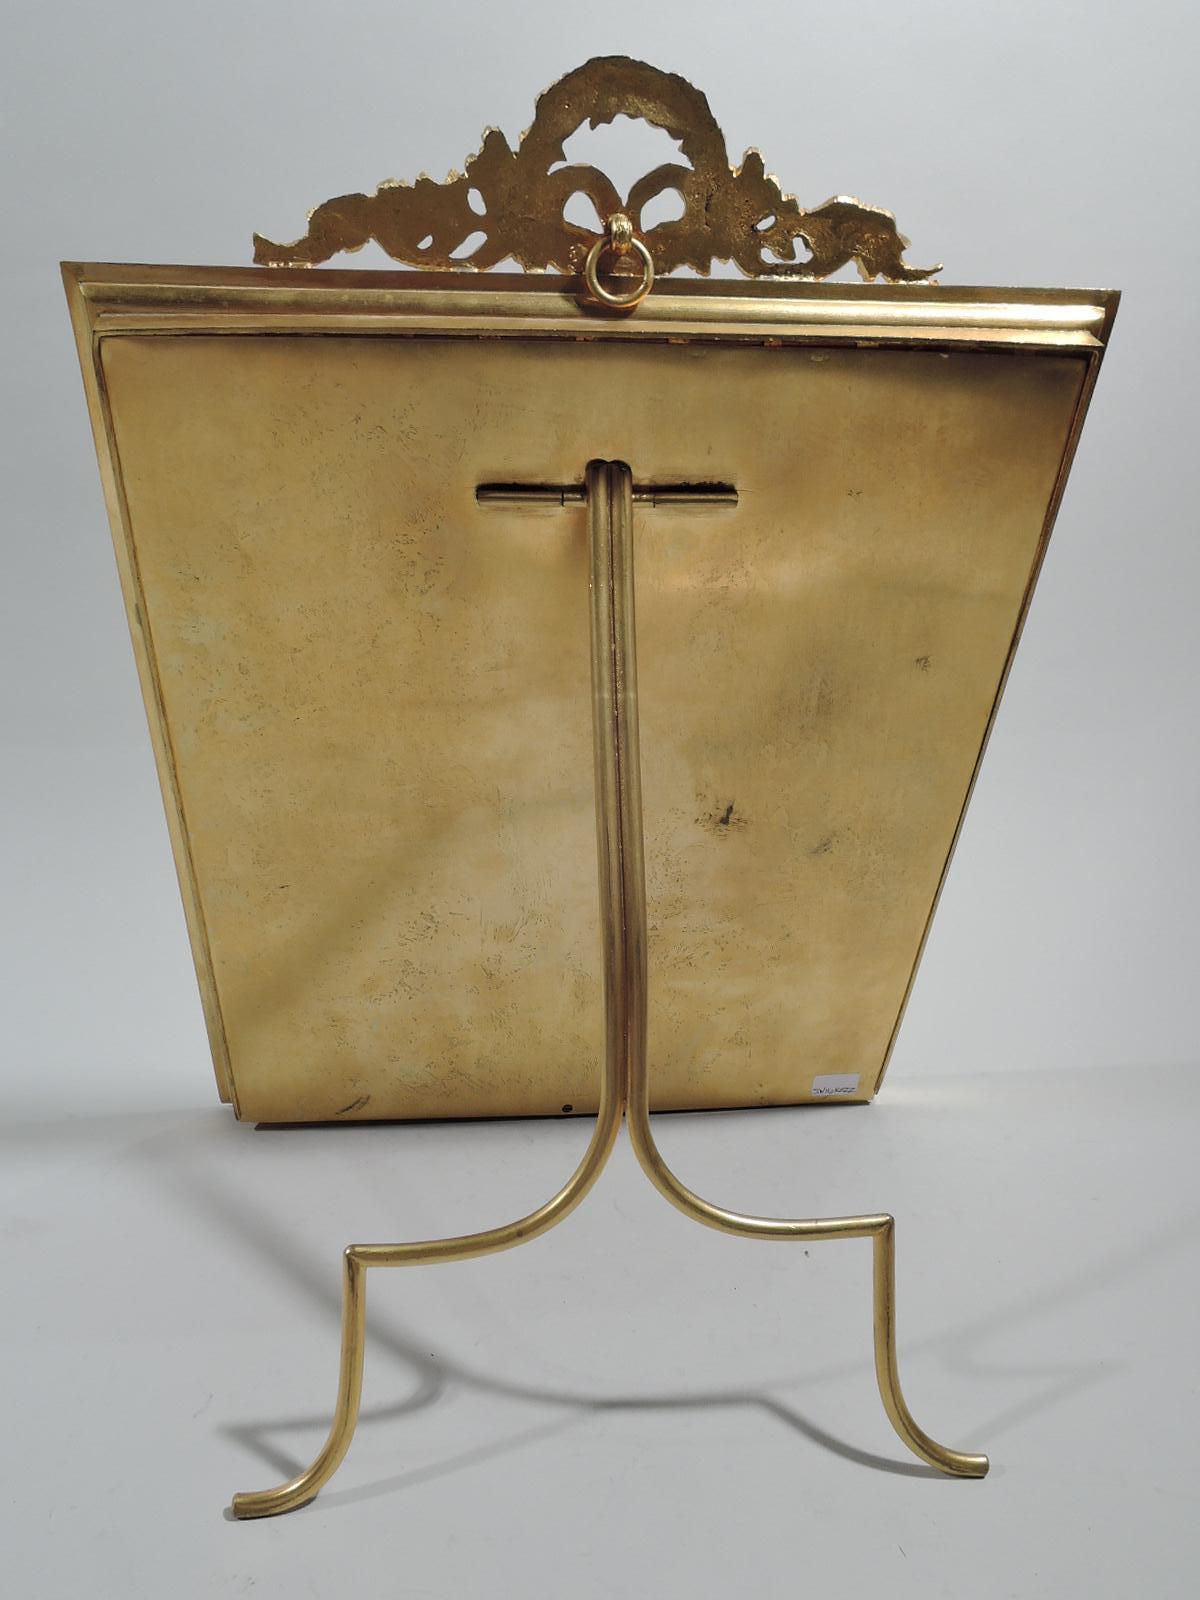 French Rococo Gilt Bronze Picture Frame with Enamel Ribbon Border In Excellent Condition For Sale In New York, NY